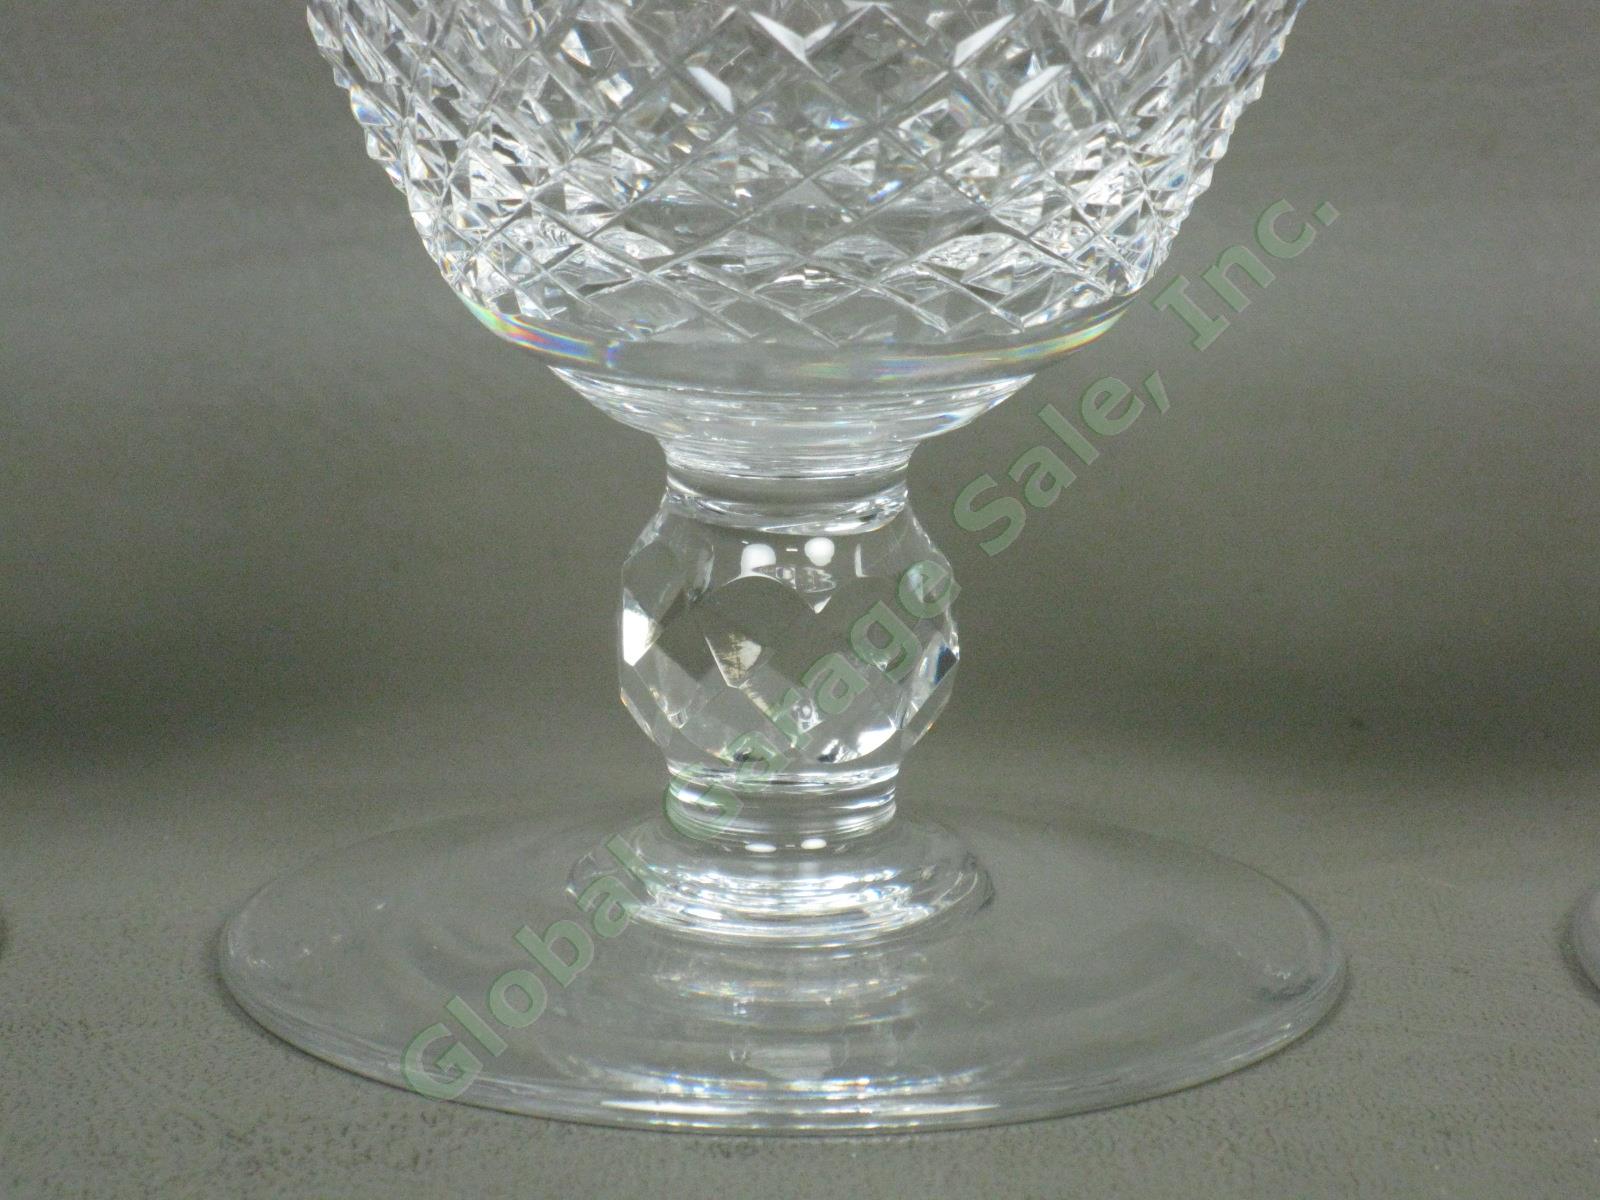 3 Waterford Cut Lead Crystal Colleen Water Goblet Glasses Set Lot 5-1/4" Tall NR 2